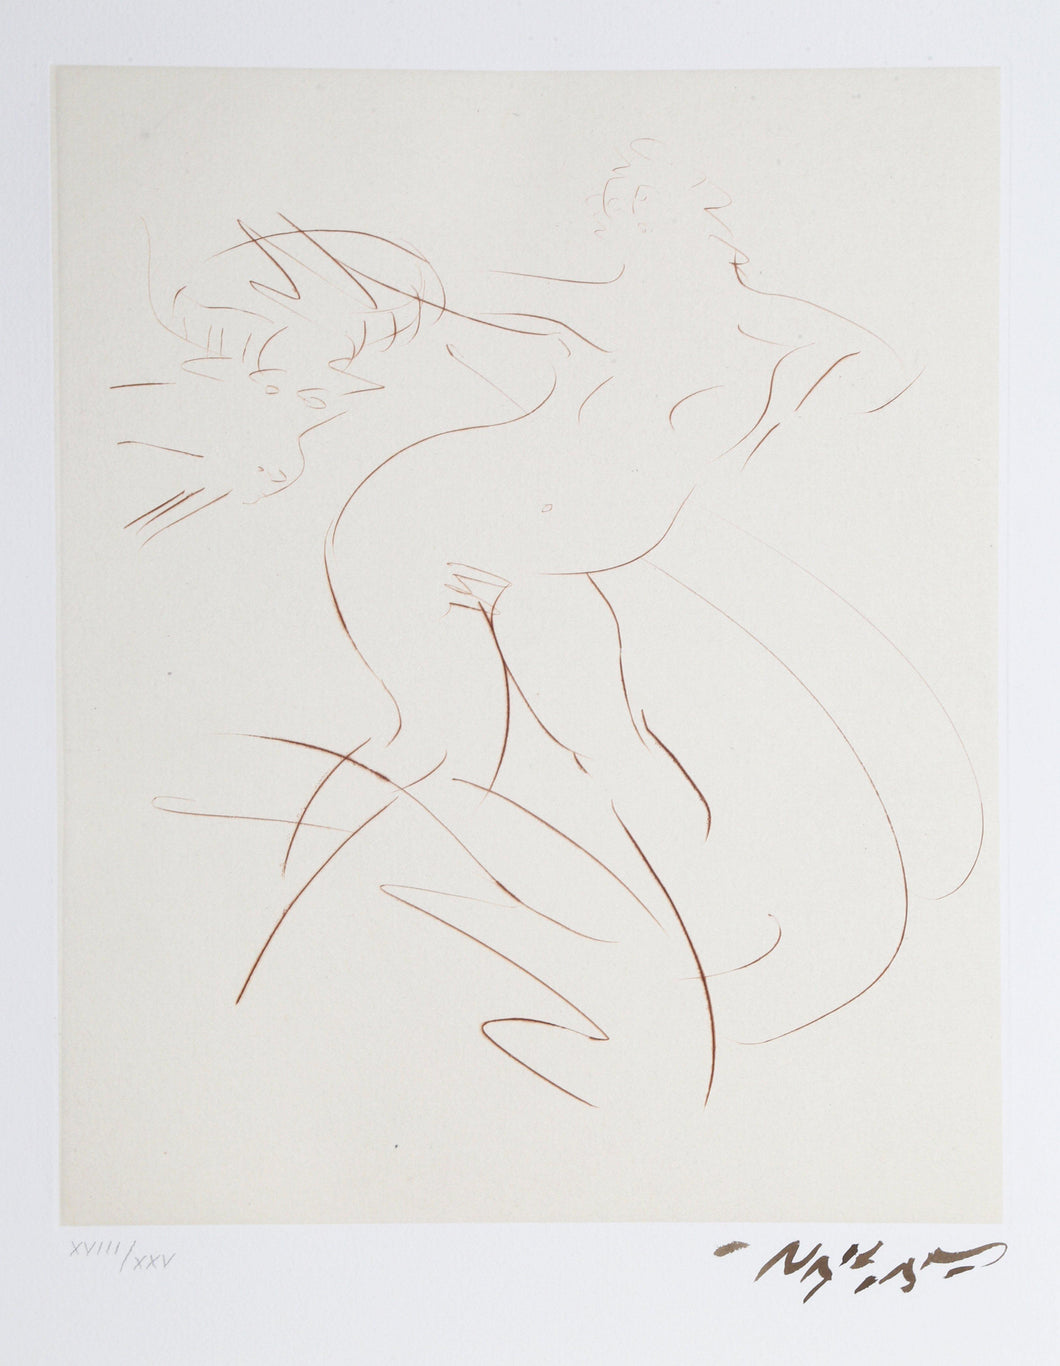 Nymph and Goat 1 (Sepia) Etching | Reuben Nakian,{{product.type}}